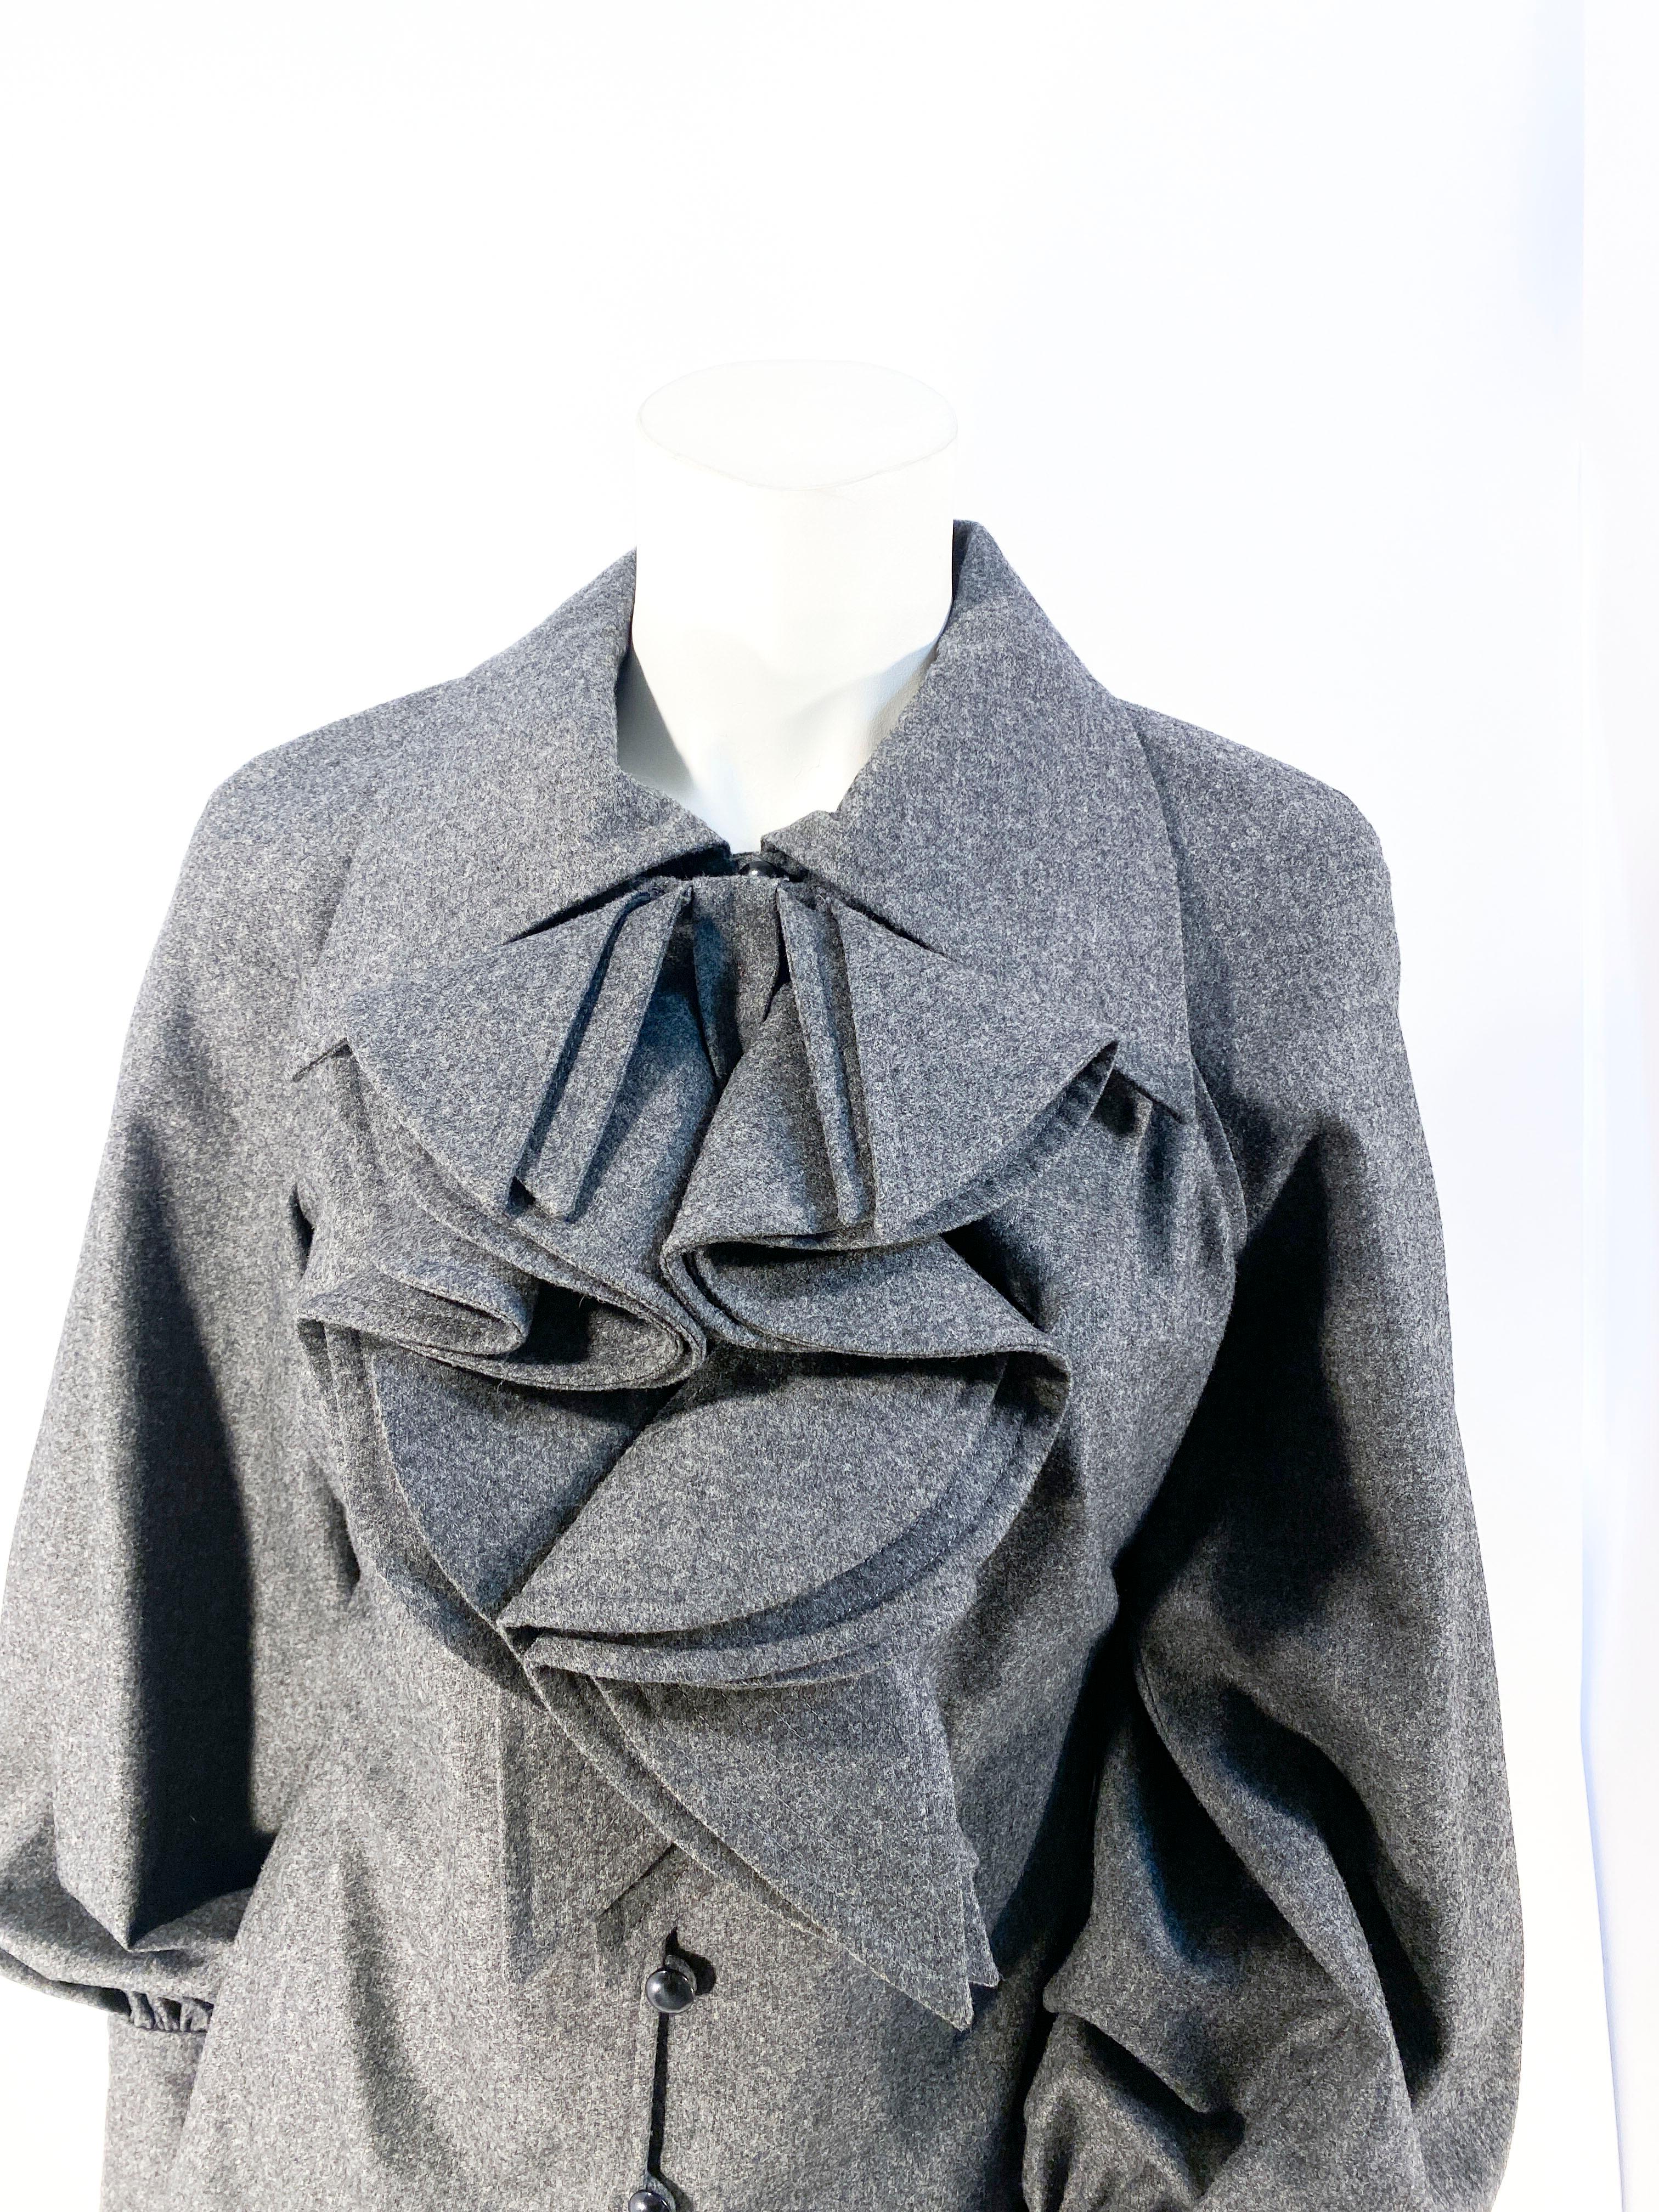 1990s Colleen Quen charcoal grey wool shirt with billowed bishop sleeves, a three buttoned front closure, fitted bodice and a matching removable wool jabot that is full and layered. 